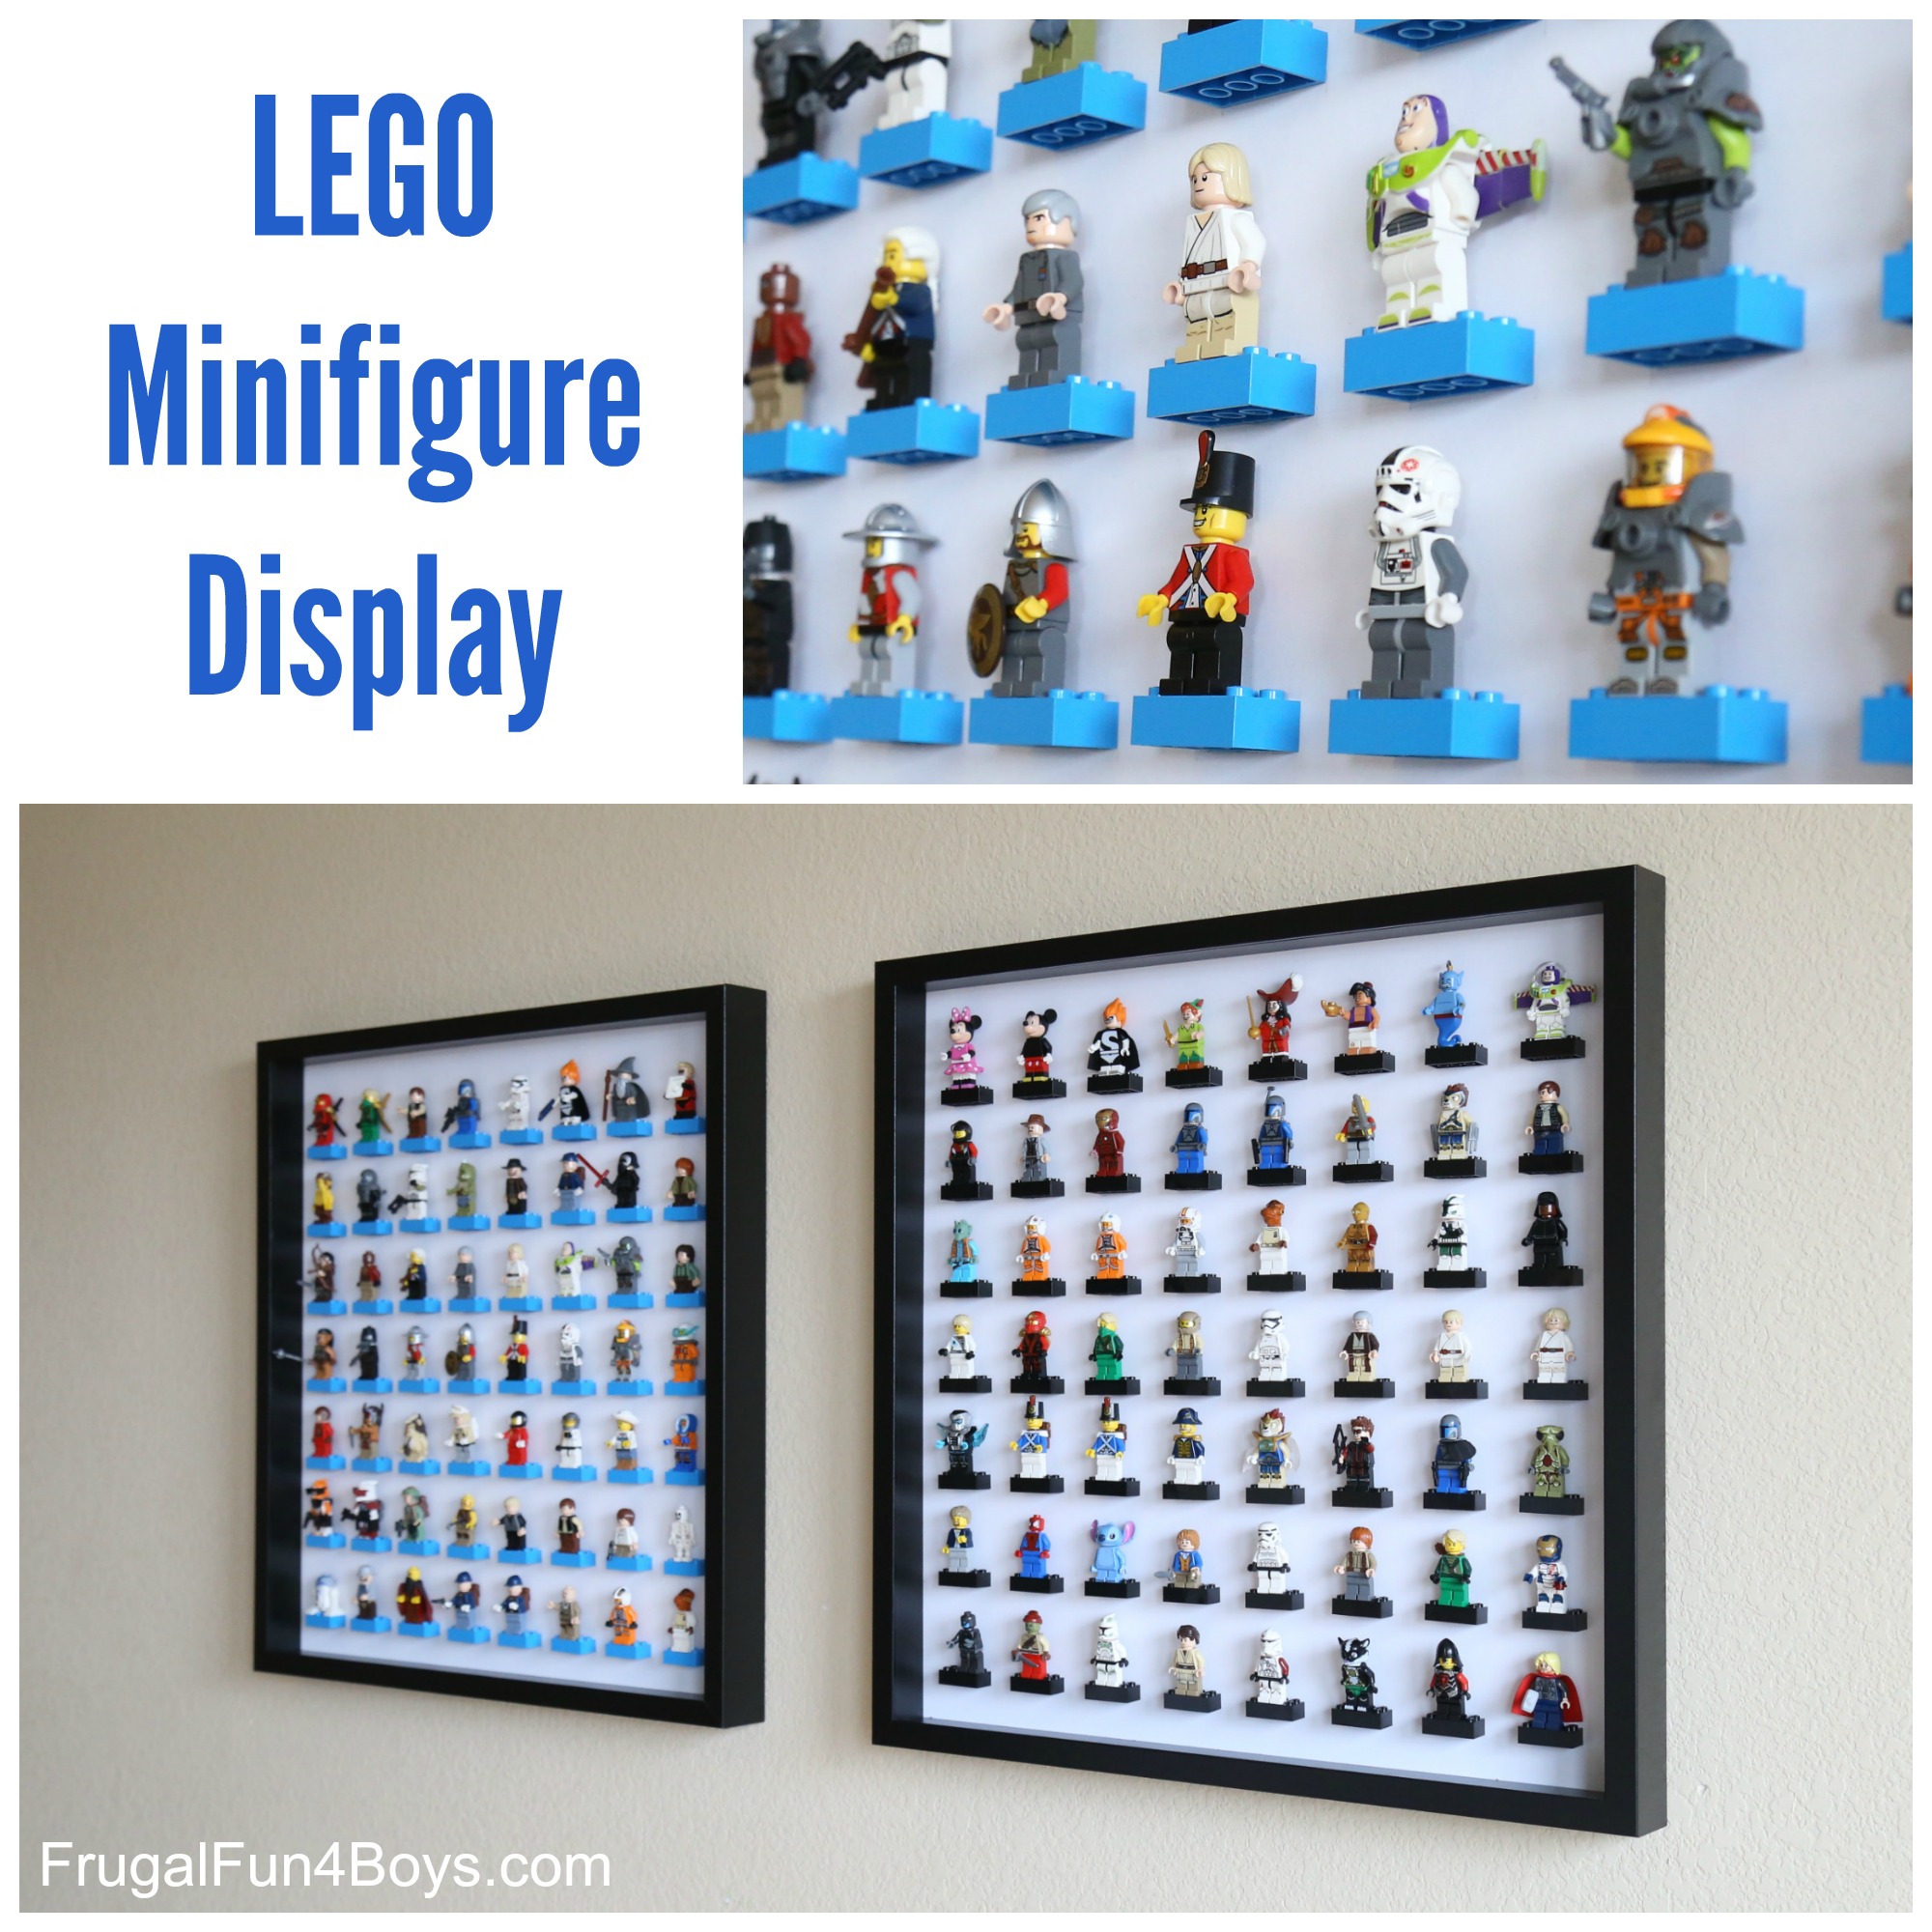 RIBBA/Sannahed Display case frame to display Lego Avengers End game Minifigures 